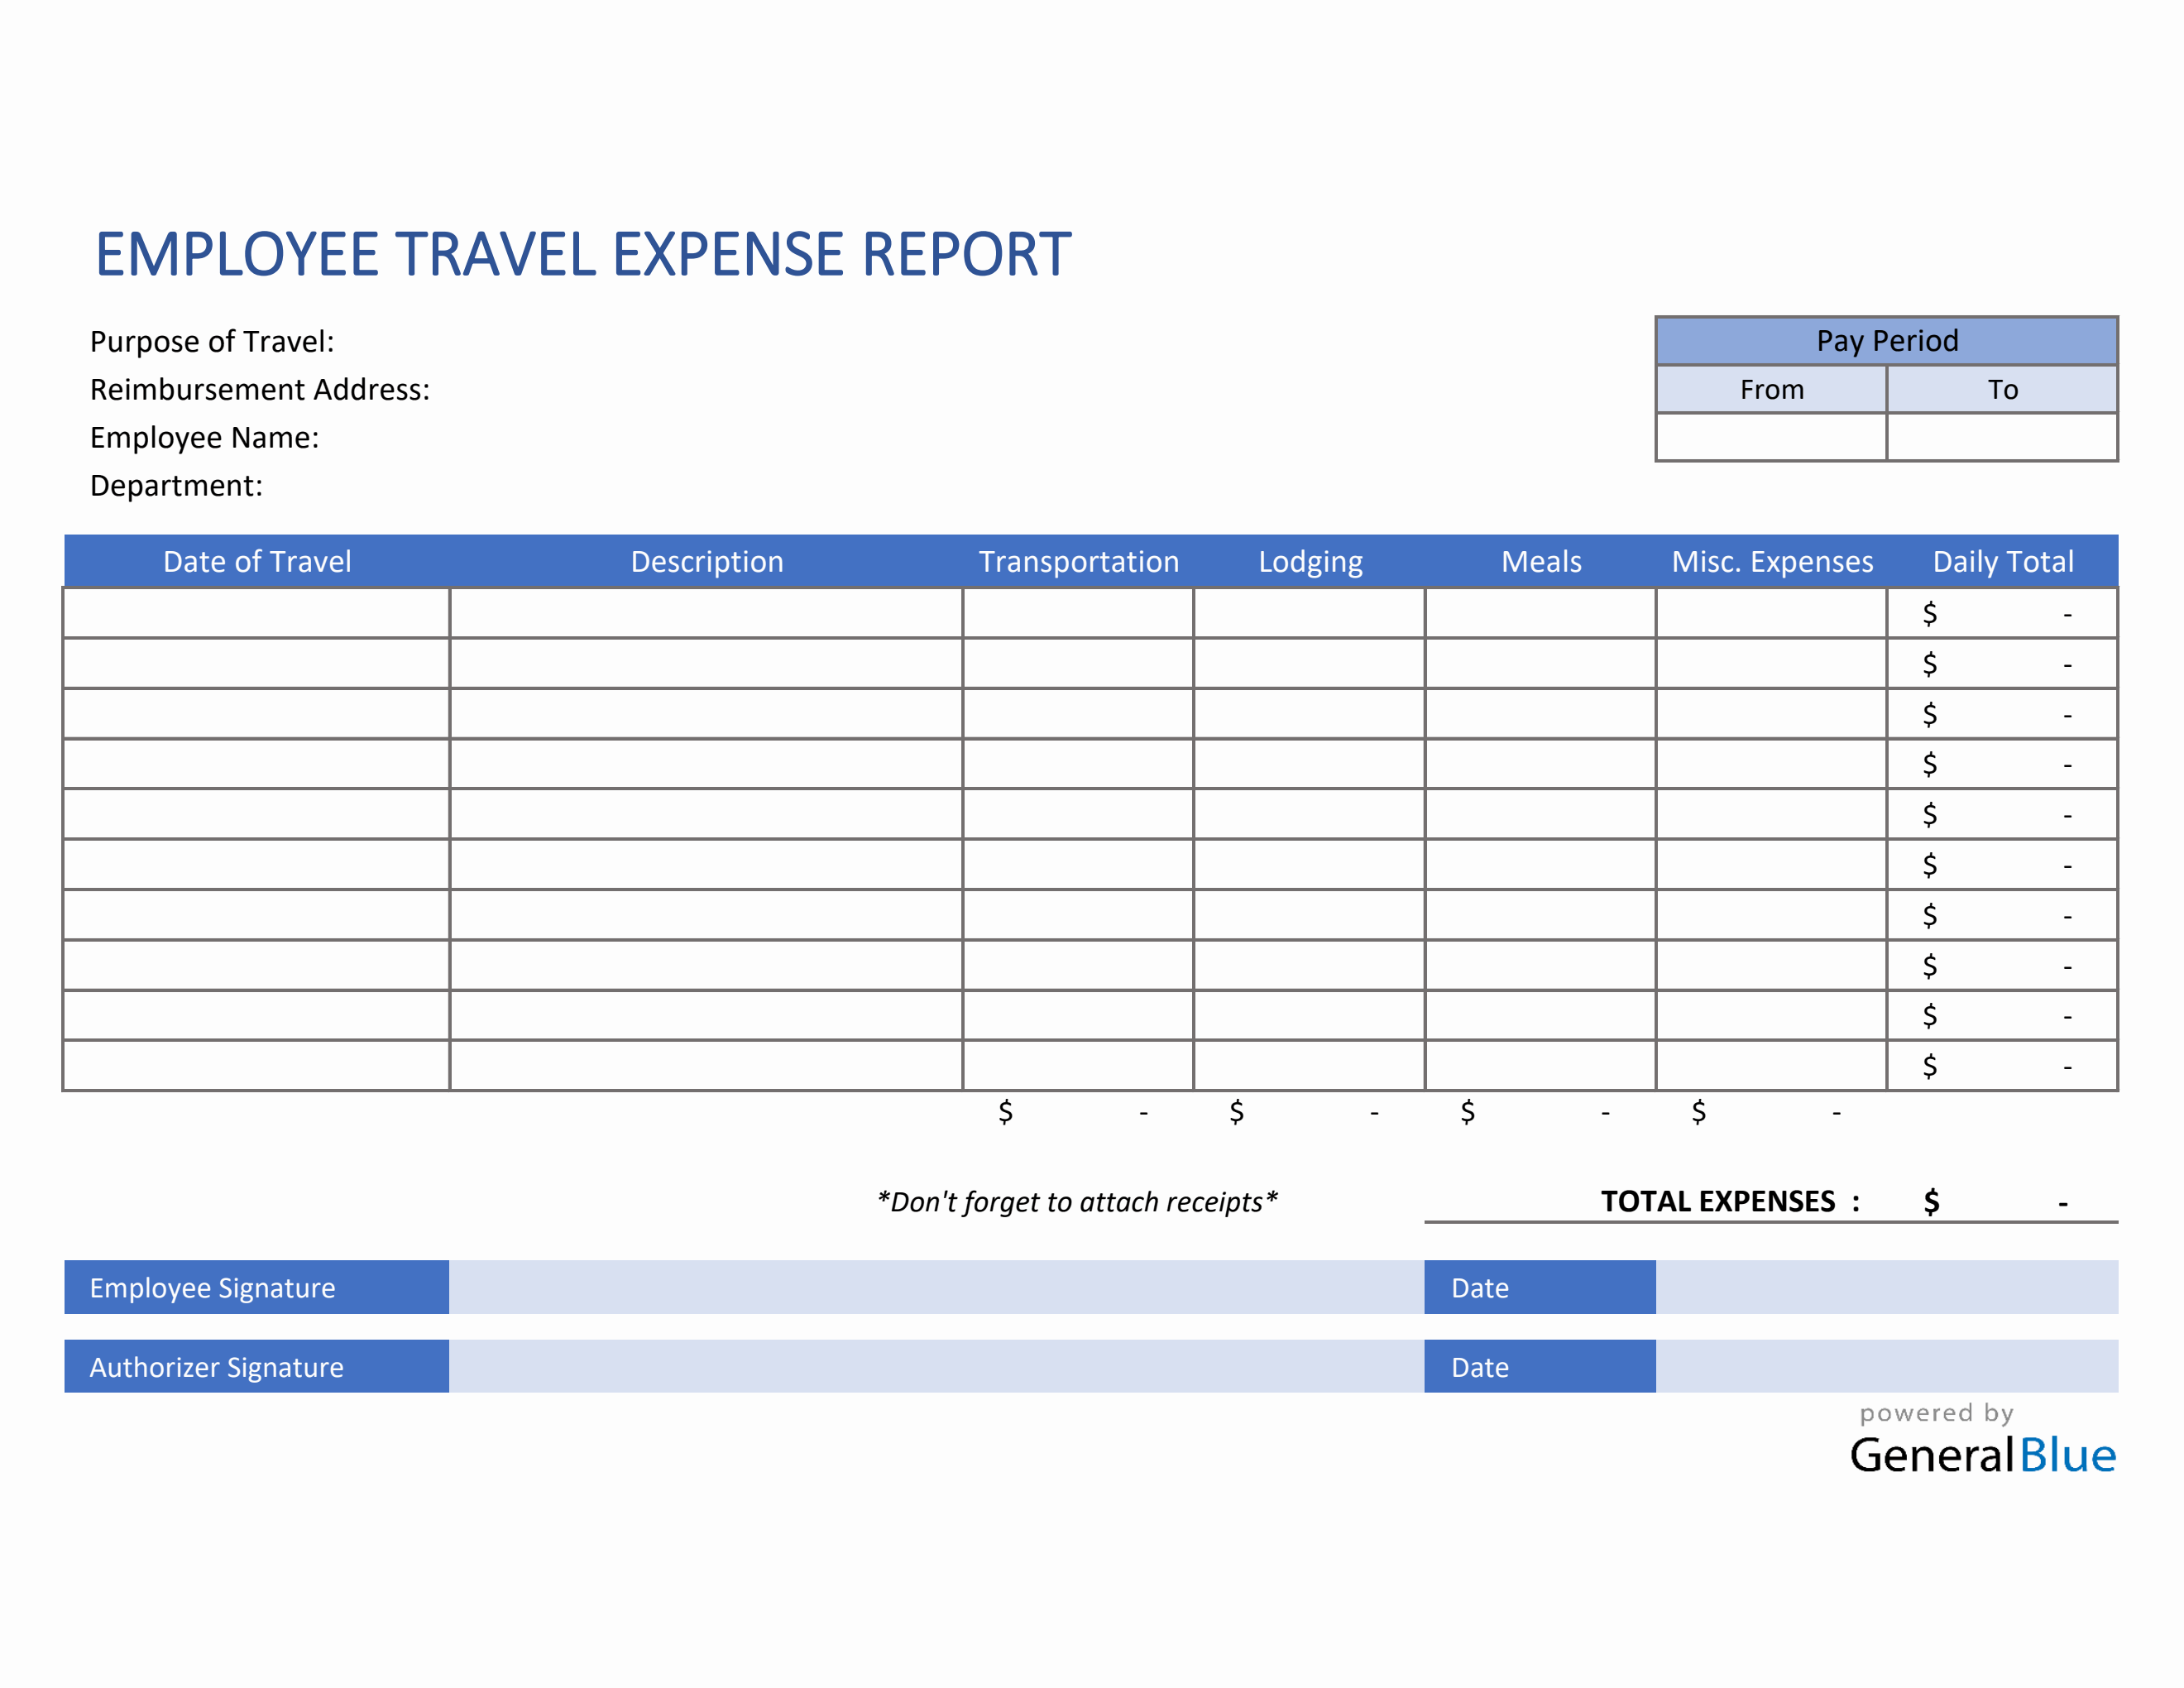 Employee Travel Expense Report Template in Excel Throughout Expense Report Template Xls